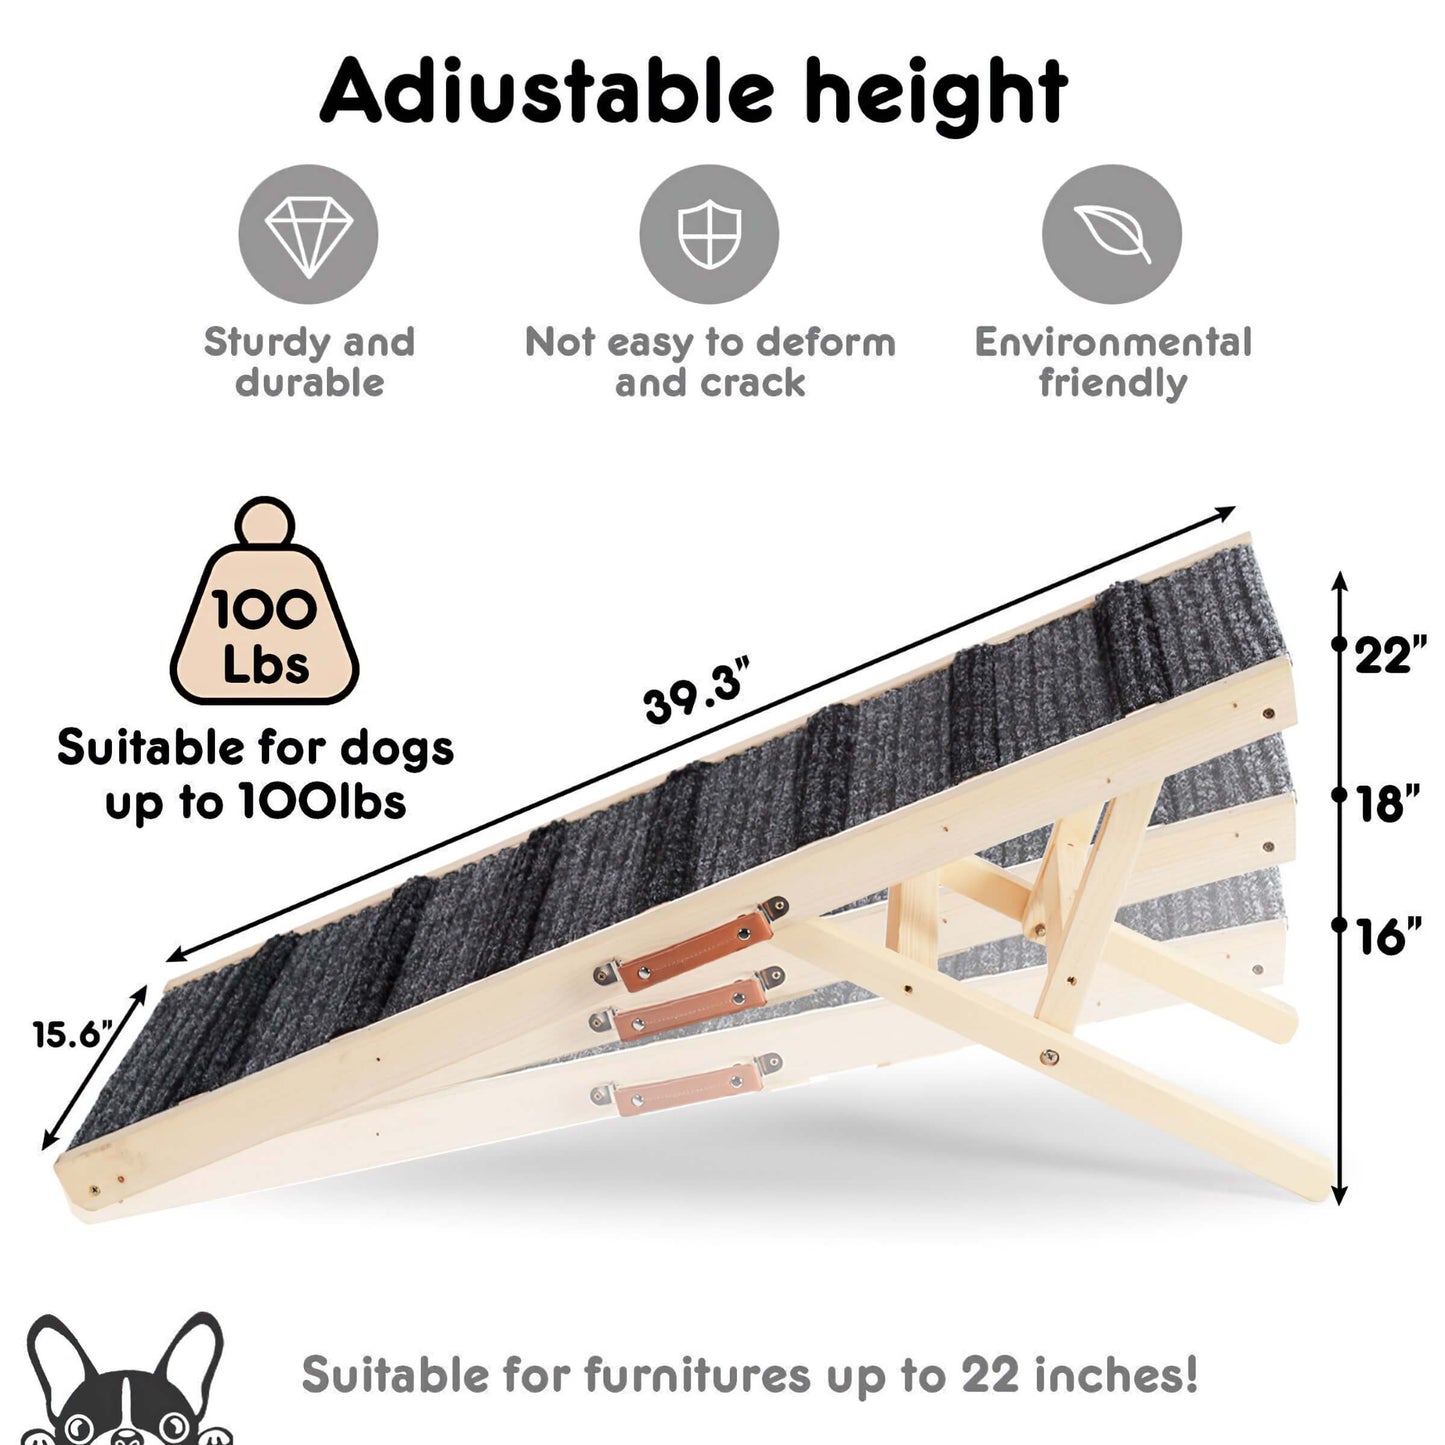 39.3" x 15.6" Premium Quality Dog Ramp for Bed and Car Heavy Duty Wood Petramp Stairs, Doggy Steps for Tall High Bed